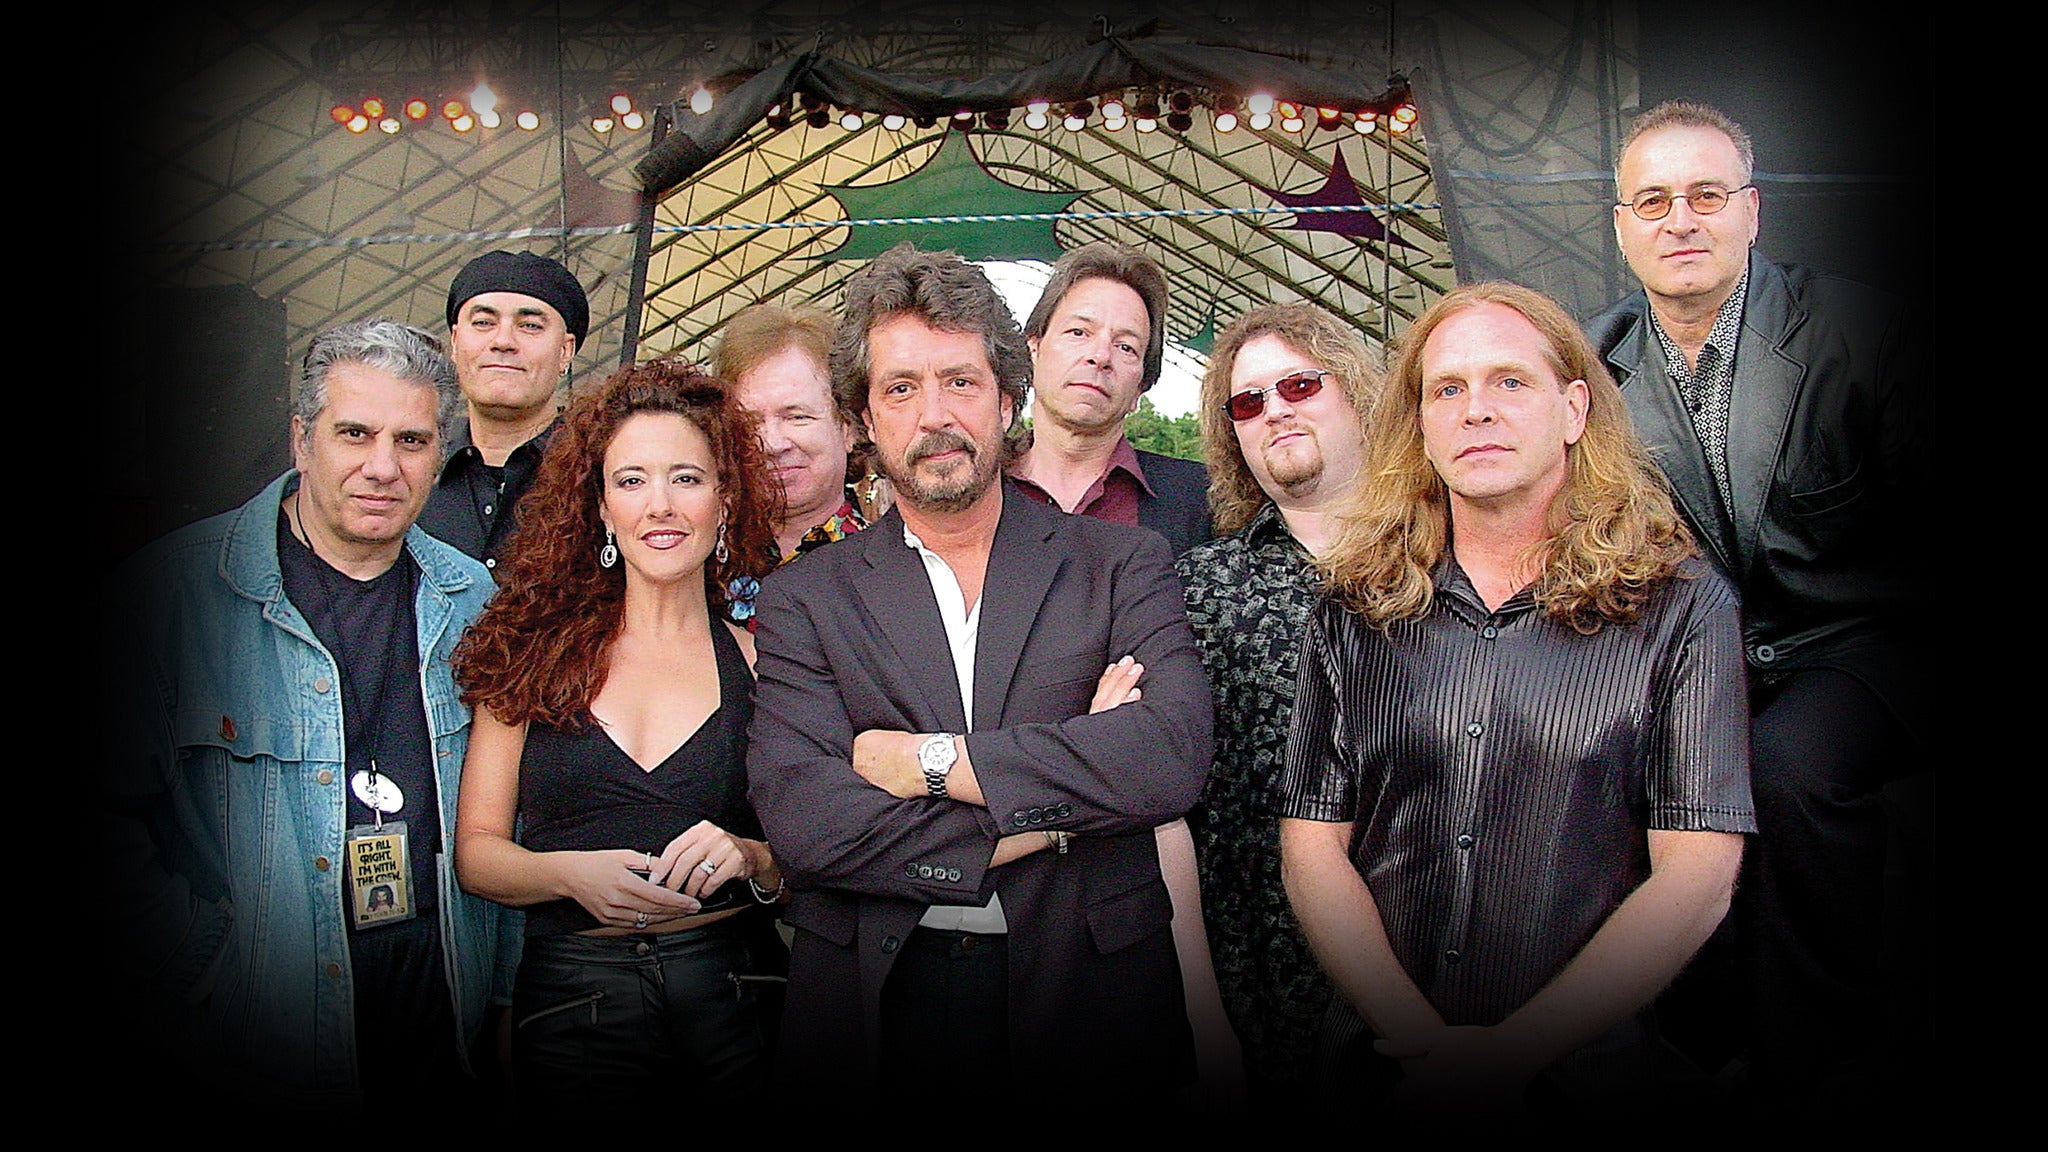 Michael Stanley and the Resonators in Canton promo photo for Live Nation Mobile App presale offer code